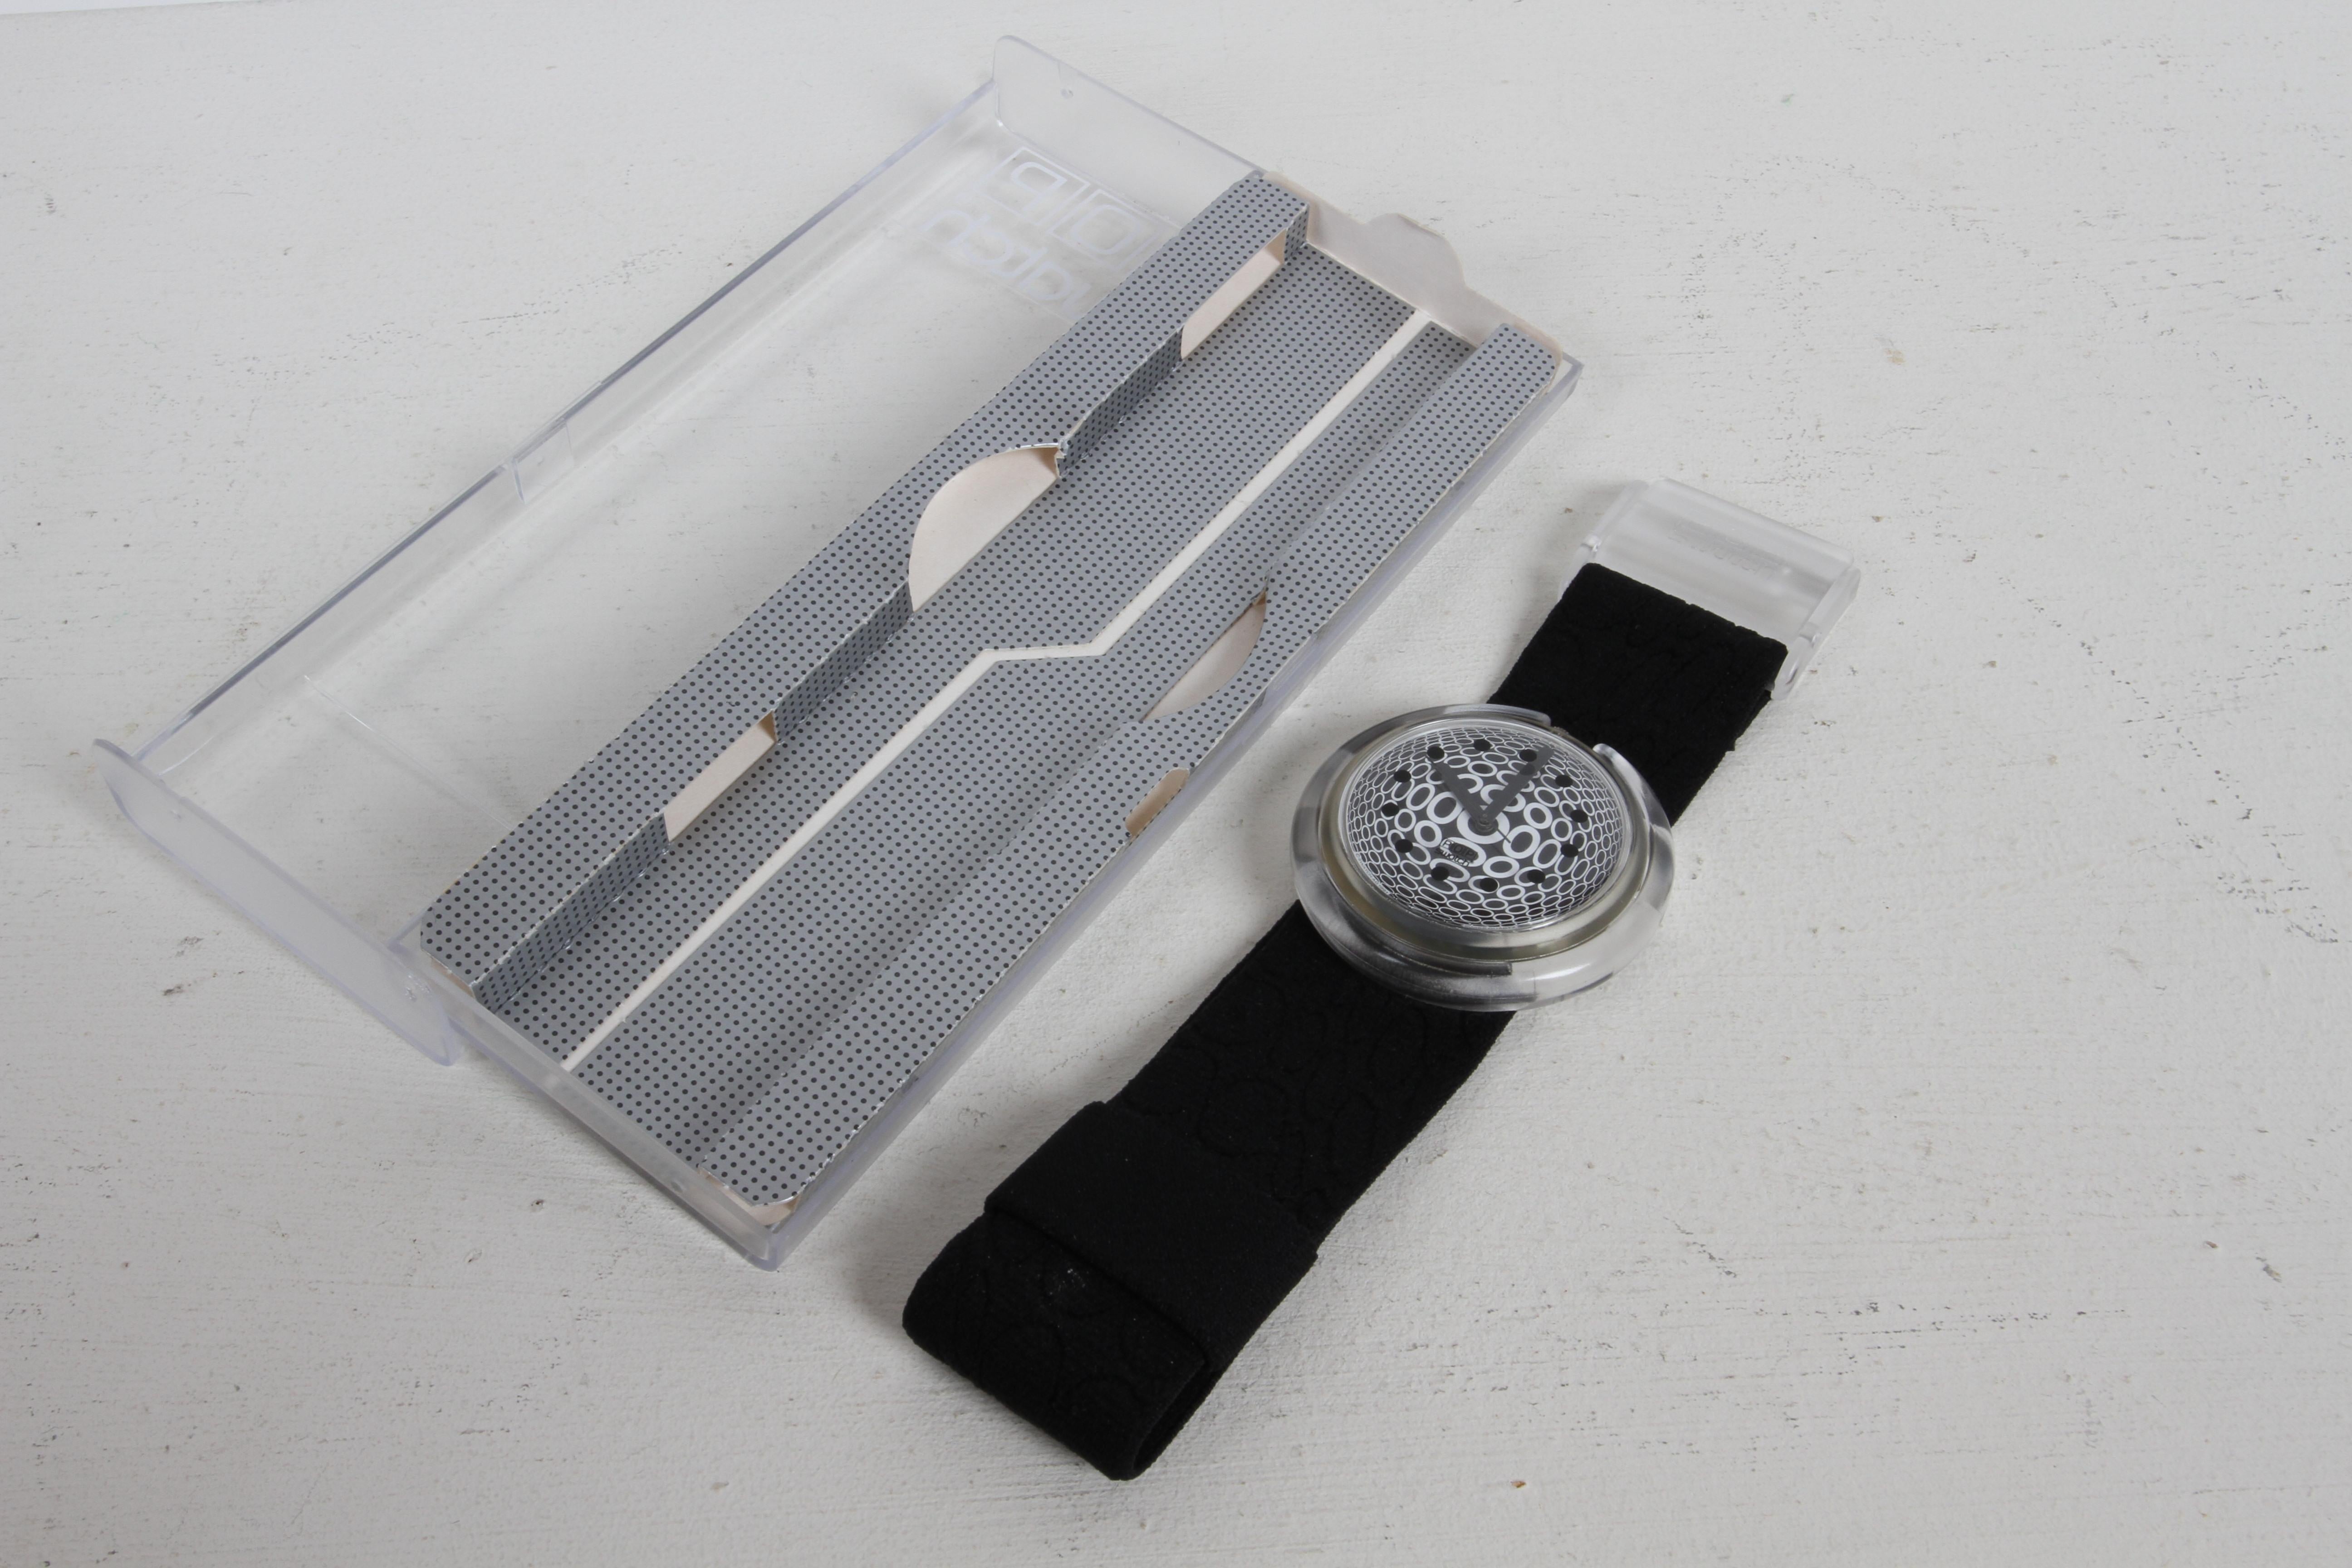 1992 Vintage POP Swatch Watch Special Dots - Op Art - Designed by Vasarely - NOS For Sale 10